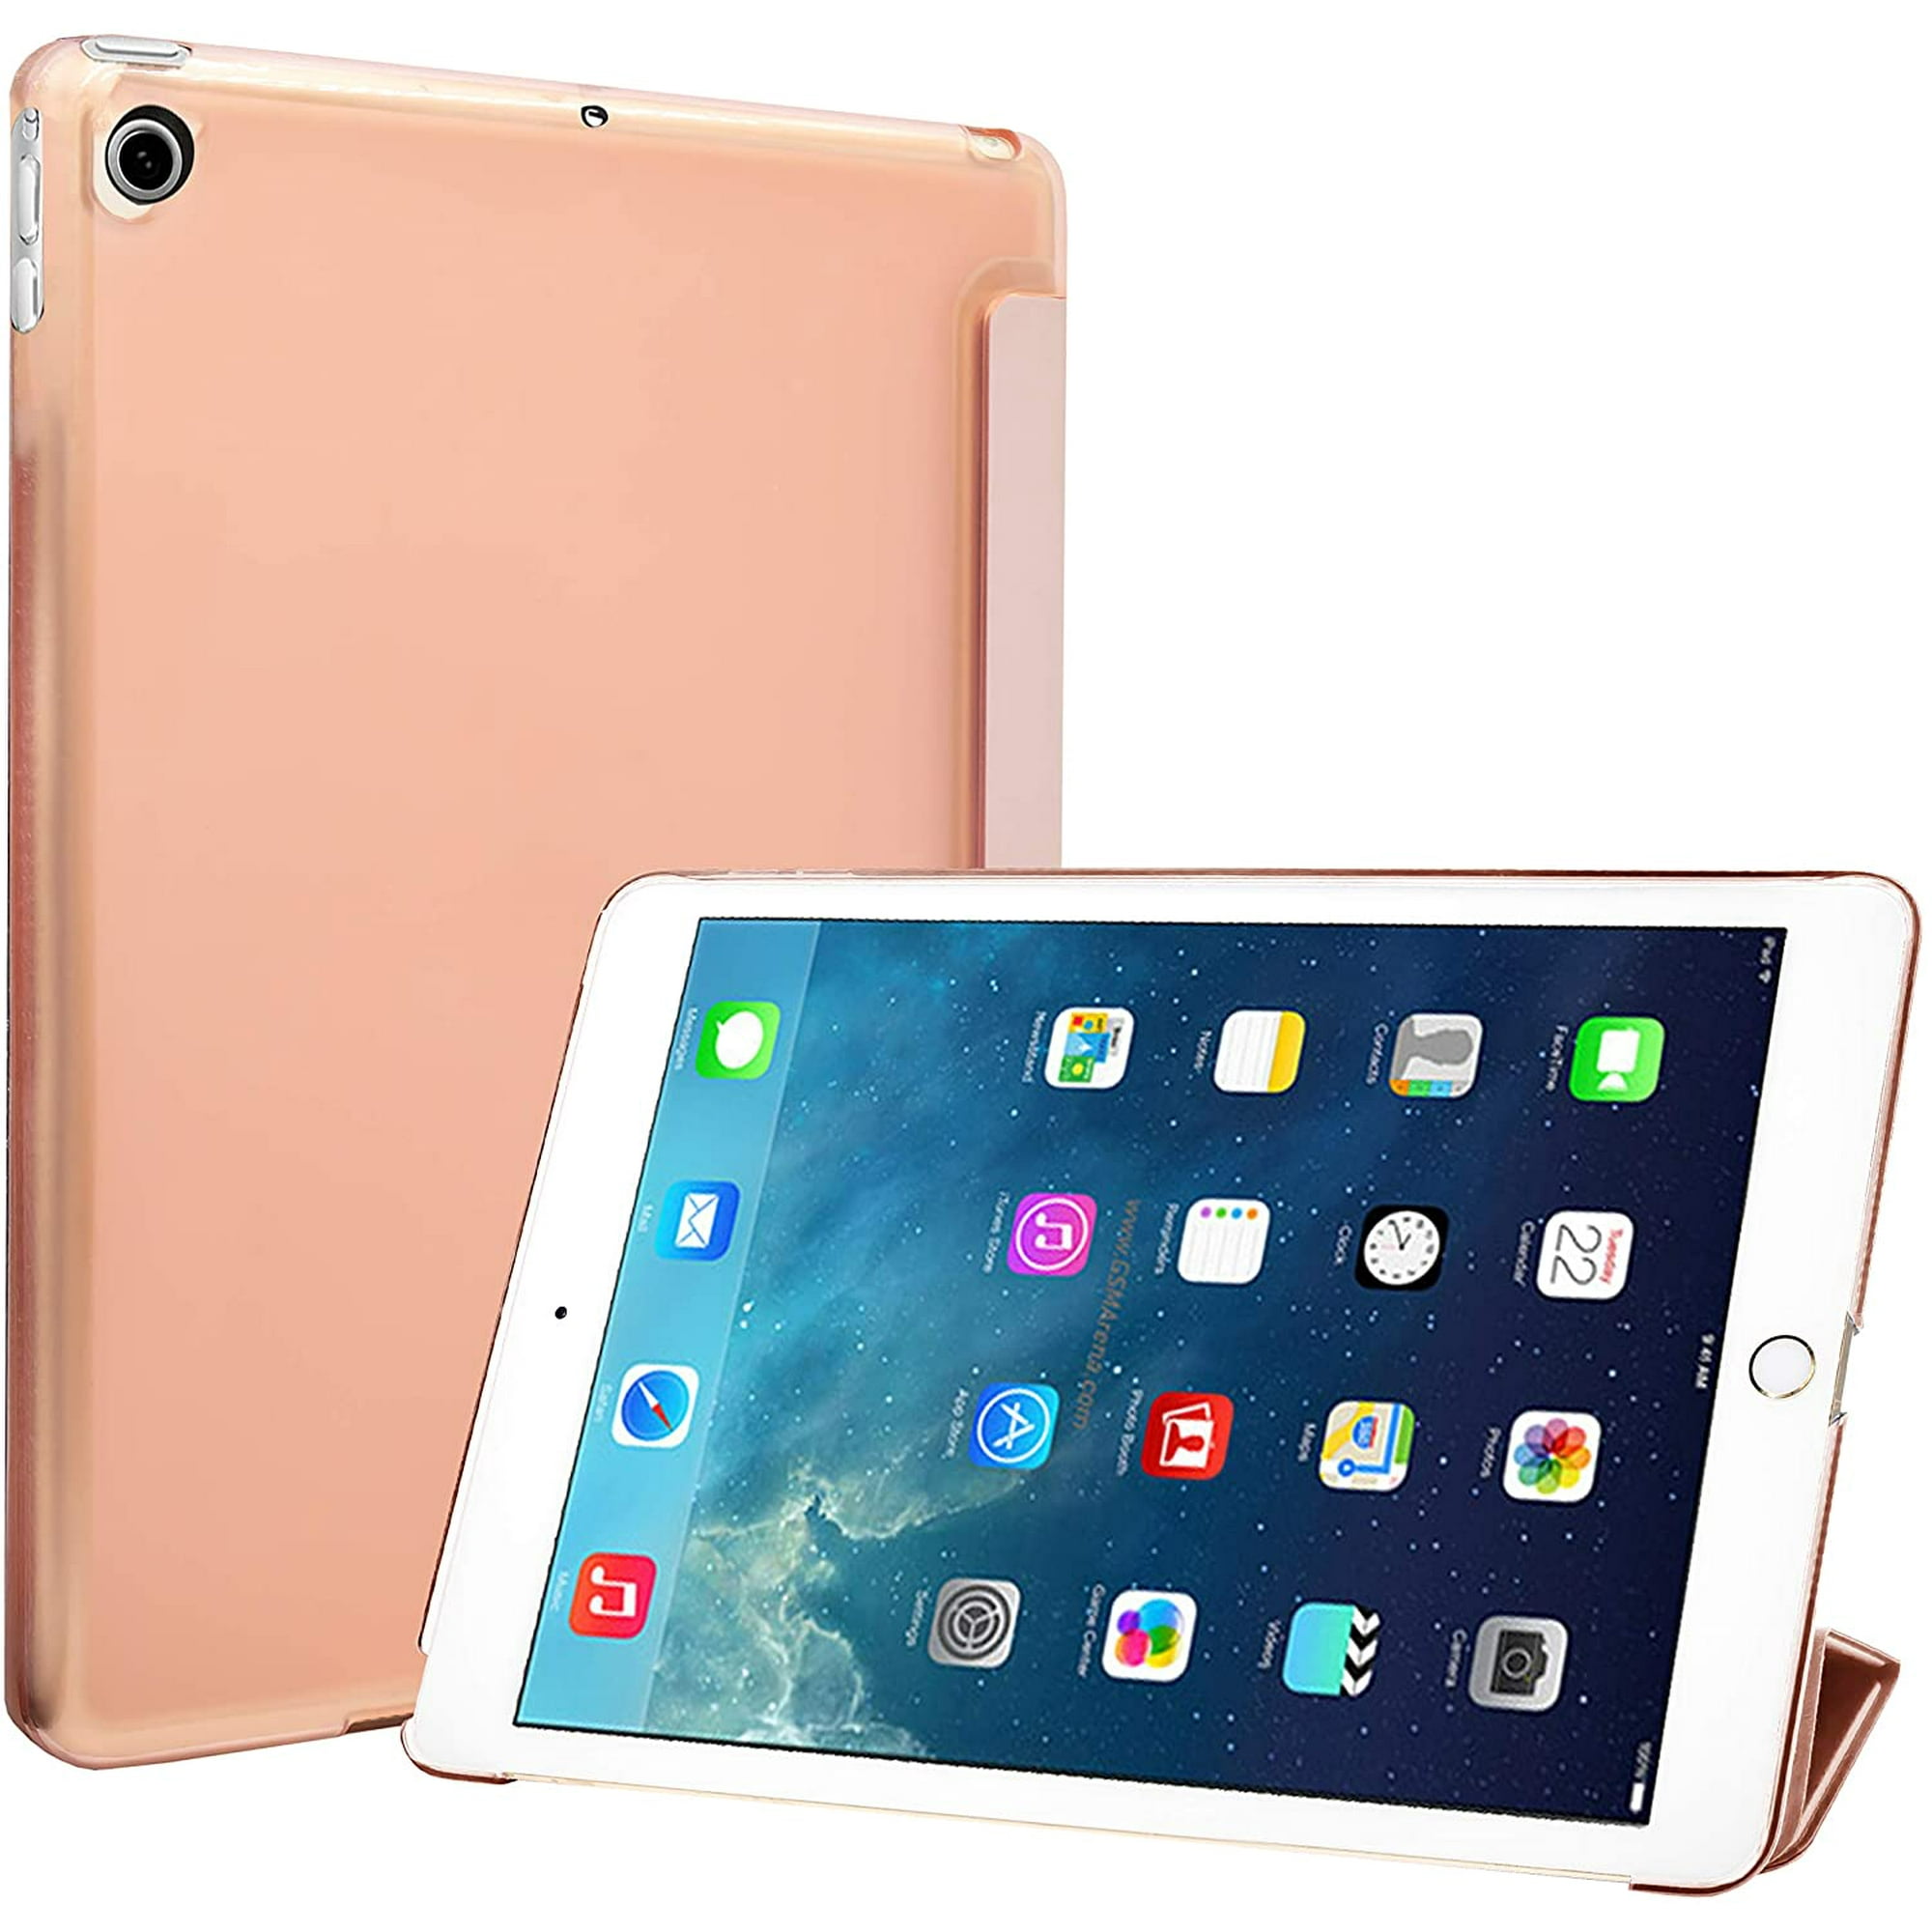 Procase Ipad Air Smart Case Ultra Slim Lightweight Stand Protective Case Shell With Translucent Frosted Back Cover Walmart Canada